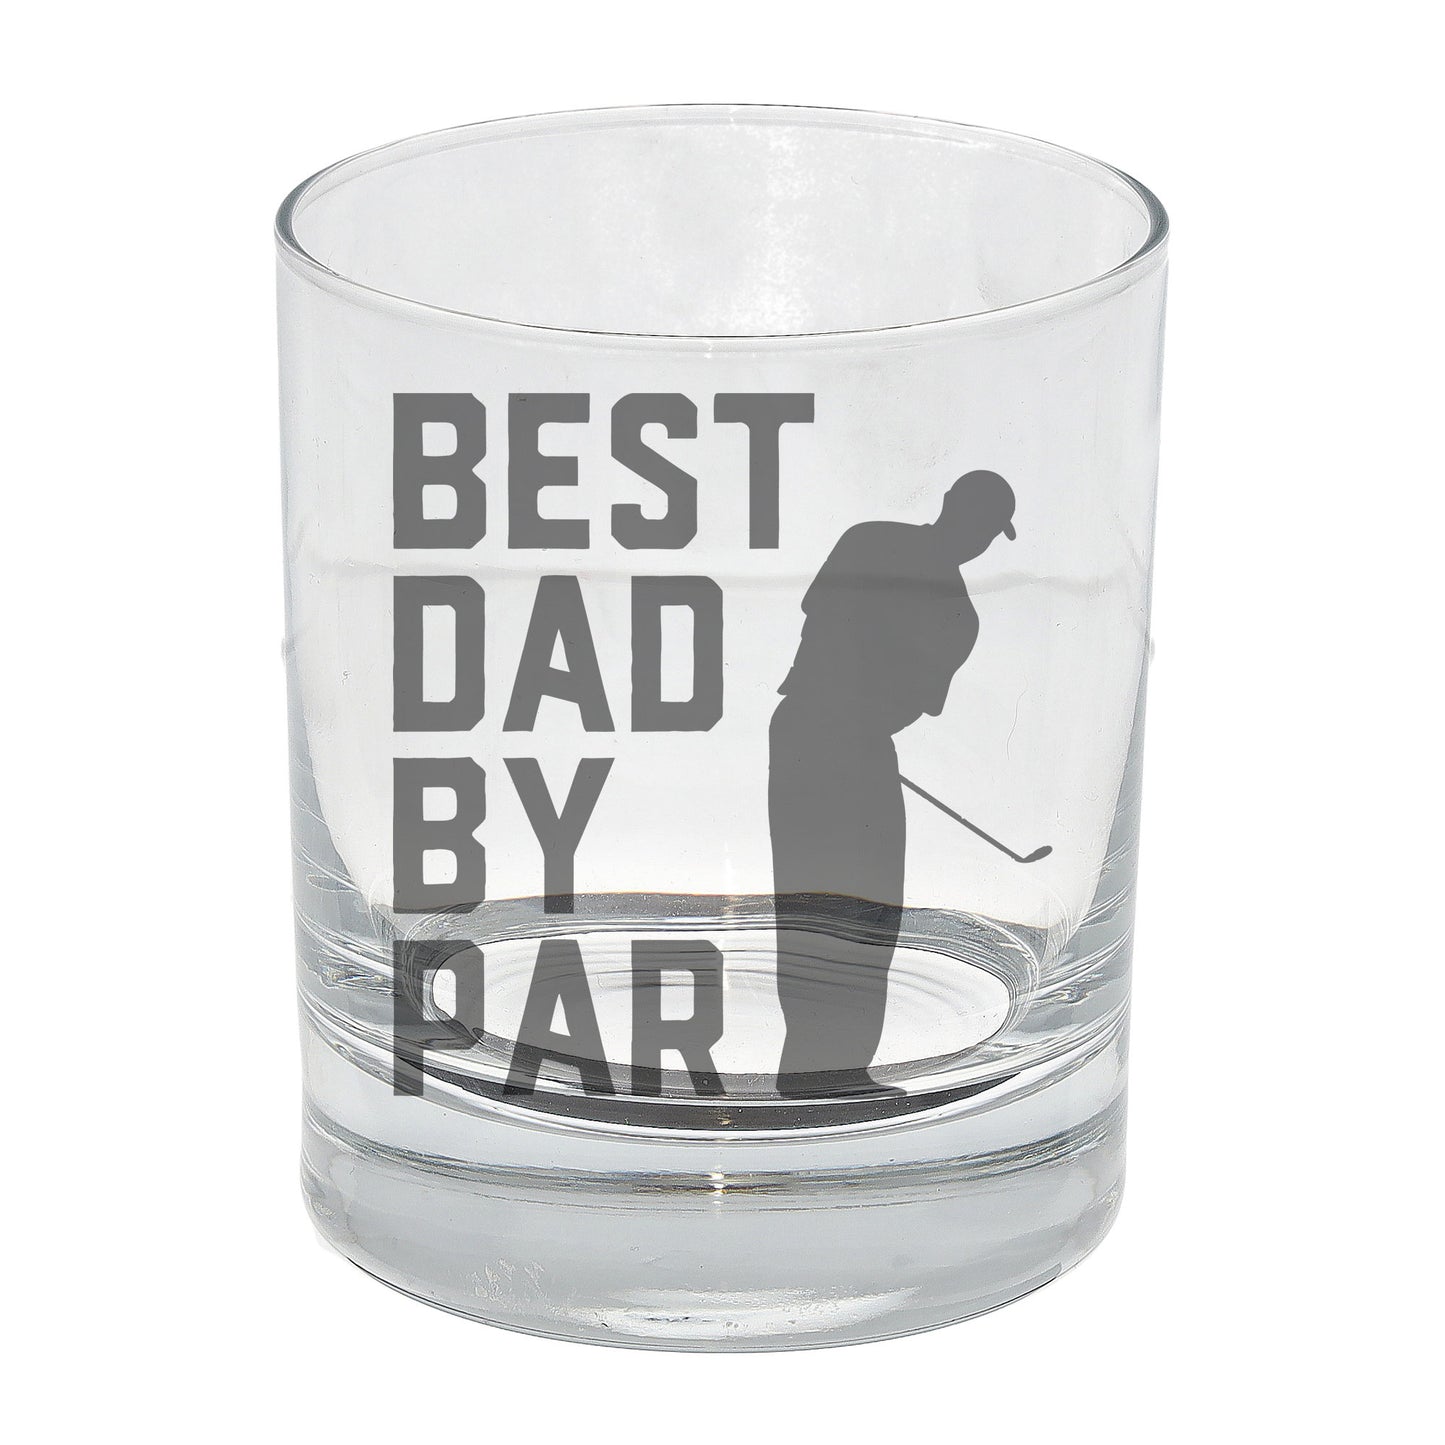 Best Dad By Par Engraved Whisky Glass and/or Coaster Set  - Always Looking Good - Whisky Glass Only  